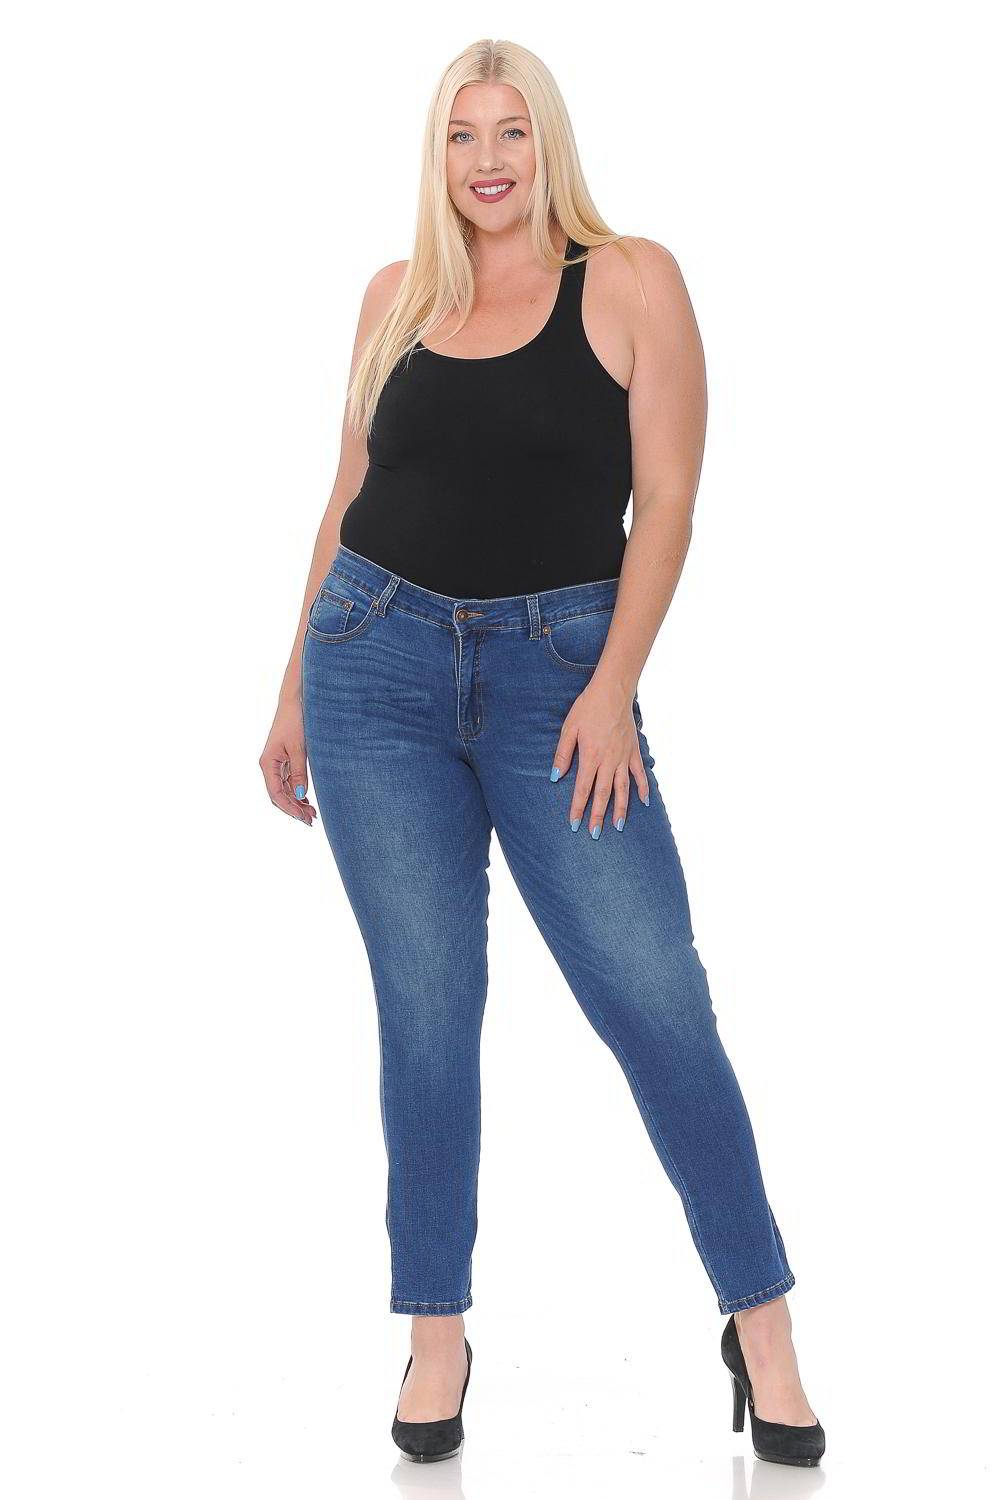 Women's Classic Distressed Skinny Jeggings. These jeggings are